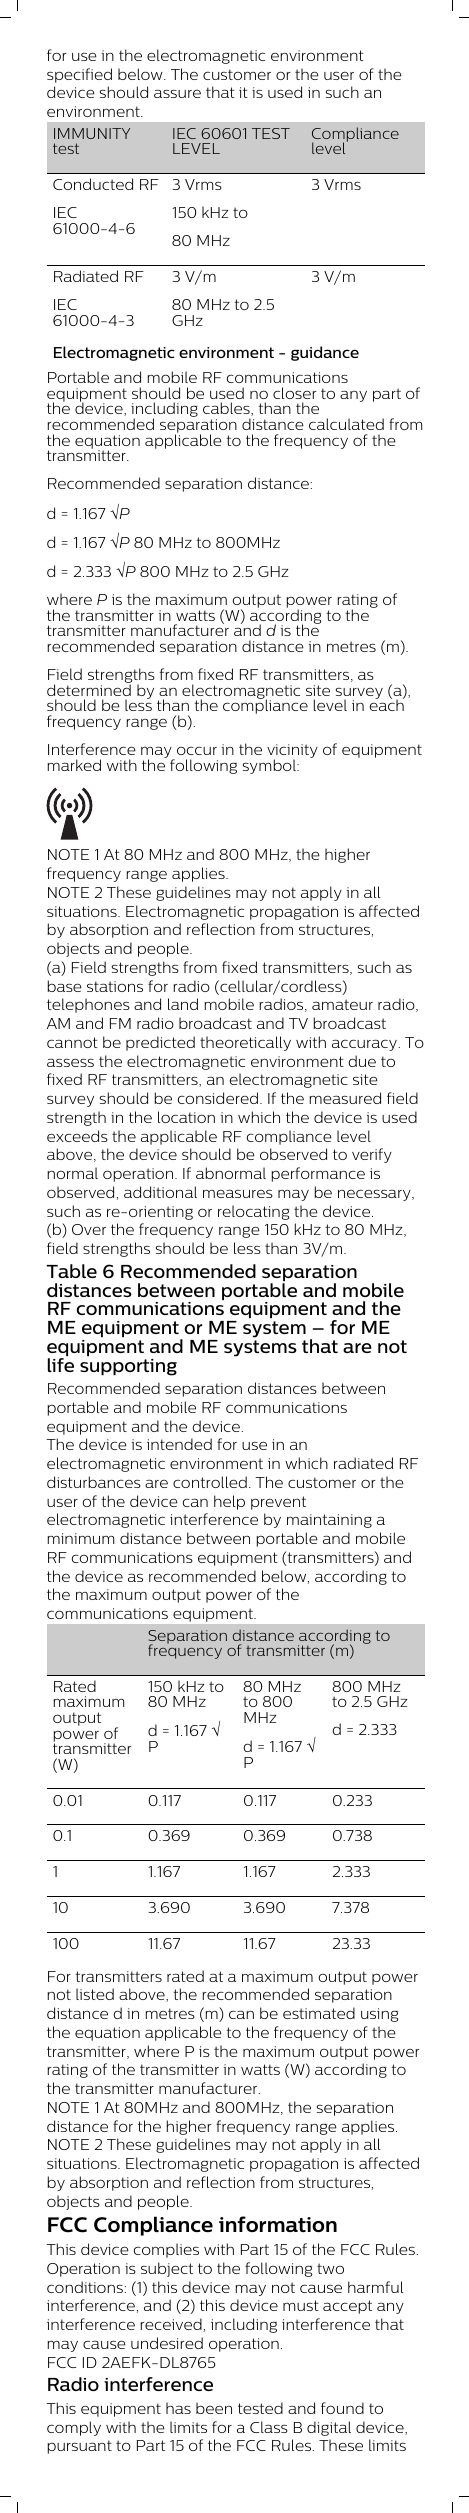 for use in the electromagnetic environmentspecified below. The customer or the user of thedevice should assure that it is used in such anenvironment.IMMUNITYtestIEC 60601 TESTLEVELCompliancelevelConducted RFIEC61000-4-63 Vrms150 kHz to80 MHz 3 VrmsRadiated RFIEC61000-4-33 V/m80 MHz to 2.5GHz3 V/mElectromagnetic environment - guidancePortable and mobile RF communicationsequipment should be used no closer to any part ofthe device, including cables, than therecommended separation distance calculated fromthe equation applicable to the frequency of thetransmitter.Recommended separation distance:d = 1.167 ÖPd = 1.167 ÖP 80 MHz to 800MHzd = 2.333 ÖP 800 MHz to 2.5 GHzwhere P is the maximum output power rating ofthe transmitter in watts (W) according to thetransmitter manufacturer and d is therecommended separation distance in metres (m).Field strengths from fixed RF transmitters, asdetermined by an electromagnetic site survey (a),should be less than the compliance level in eachfrequency range (b).Interference may occur in the vicinity of equipmentmarked with the following symbol: NOTE 1 At 80 MHz and 800 MHz, the higherfrequency range applies.NOTE 2 These guidelines may not apply in allsituations. Electromagnetic propagation is affectedby absorption and reflection from structures,objects and people.(a) Field strengths from fixed transmitters, such asbase stations for radio (cellular/cordless)telephones and land mobile radios, amateur radio,AM and FM radio broadcast and TV broadcastcannot be predicted theoretically with accuracy. Toassess the electromagnetic environment due tofixed RF transmitters, an electromagnetic sitesurvey should be considered. If the measured fieldstrength in the location in which the device is usedexceeds the applicable RF compliance levelabove, the device should be observed to verifynormal operation. If abnormal performance isobserved, additional measures may be necessary,such as re-orienting or relocating the device.(b) Over the frequency range 150 kHz to 80 MHz,field strengths should be less than 3V/m.Table 6 Recommended separationdistances between portable and mobileRF communications equipment and theME equipment or ME system – for MEequipment and ME systems that are notlife supportingRecommended separation distances betweenportable and mobile RF communicationsequipment and the device.The device is intended for use in anelectromagnetic environment in which radiated RFdisturbances are controlled. The customer or theuser of the device can help preventelectromagnetic interference by maintaining aminimum distance between portable and mobileRF communications equipment (transmitters) andthe device as recommended below, according tothe maximum output power of thecommunications equipment.  Separation distance according tofrequency of transmitter (m)Ratedmaximumoutputpower oftransmitter(W)150 kHz to80 MHzd = 1.167 ÖP80 MHzto 800MHz d = 1.167 ÖP800 MHzto 2.5 GHzd = 2.3330.01 0.117 0.117 0.2330.1 0.369 0.369 0.7381 1.167 1.167 2.33310 3.690 3.690 7.378100 11.67 11.67 23.33For transmitters rated at a maximum output powernot listed above, the recommended separationdistance d in metres (m) can be estimated usingthe equation applicable to the frequency of thetransmitter, where P is the maximum output powerrating of the transmitter in watts (W) according tothe transmitter manufacturer.NOTE 1 At 80MHz and 800MHz, the separationdistance for the higher frequency range applies.NOTE 2 These guidelines may not apply in allsituations. Electromagnetic propagation is affectedby absorption and reflection from structures,objects and people.FCC Compliance informationThis device complies with Part 15 of the FCC Rules.Operation is subject to the following twoconditions: (1) this device may not cause harmfulinterference, and (2) this device must accept anyinterference received, including interference thatmay cause undesired operation.FCC ID 2AEFK-DL8765 Radio interferenceThis equipment has been tested and found tocomply with the limits for a Class B digital device,pursuant to Part 15 of the FCC Rules. These limits